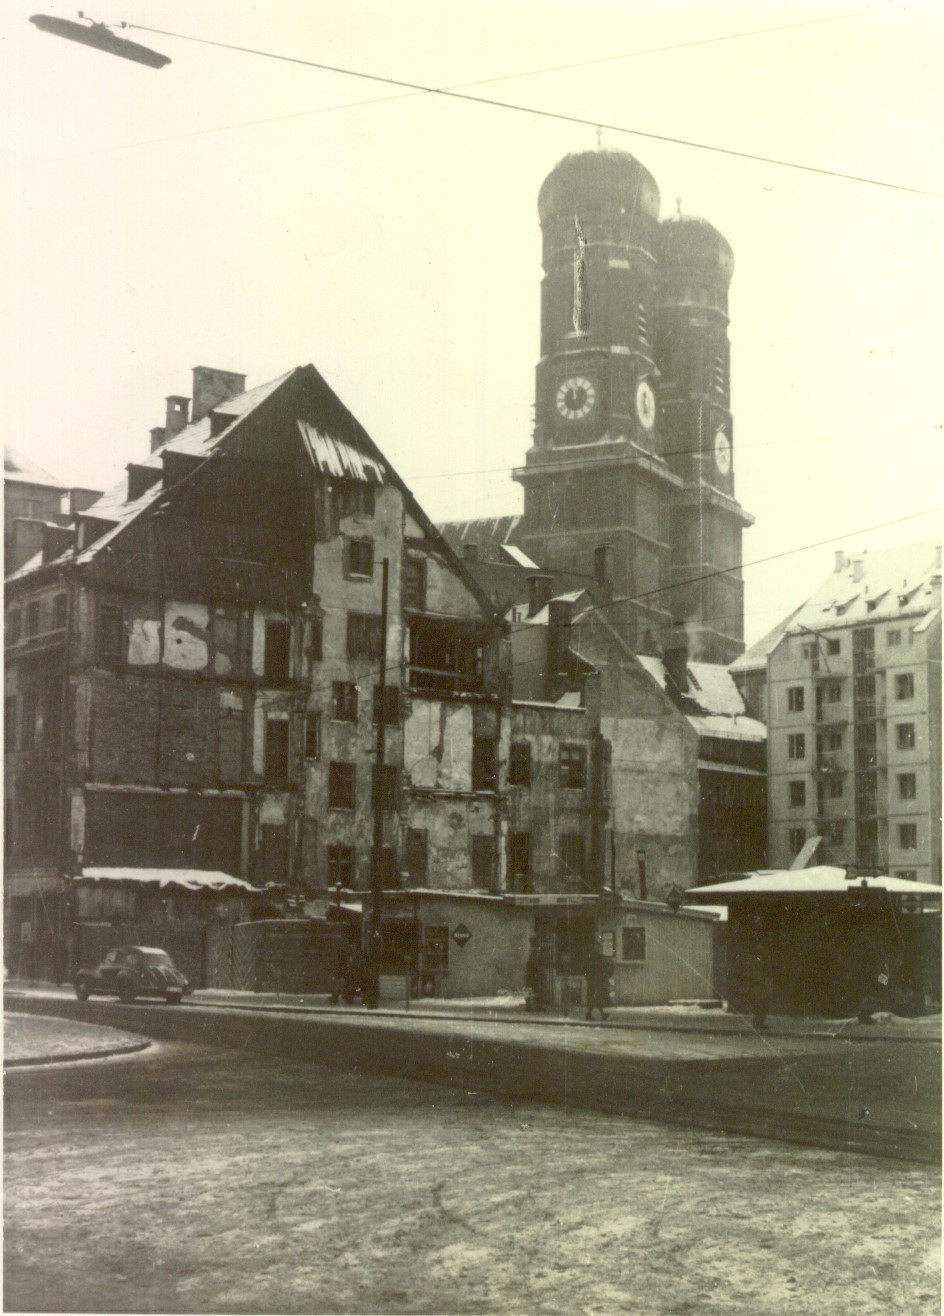 Heavily bombed Munich apartments in the Altstadt in front of the Frauenkirche, 1956. Photo by Ken Kurze